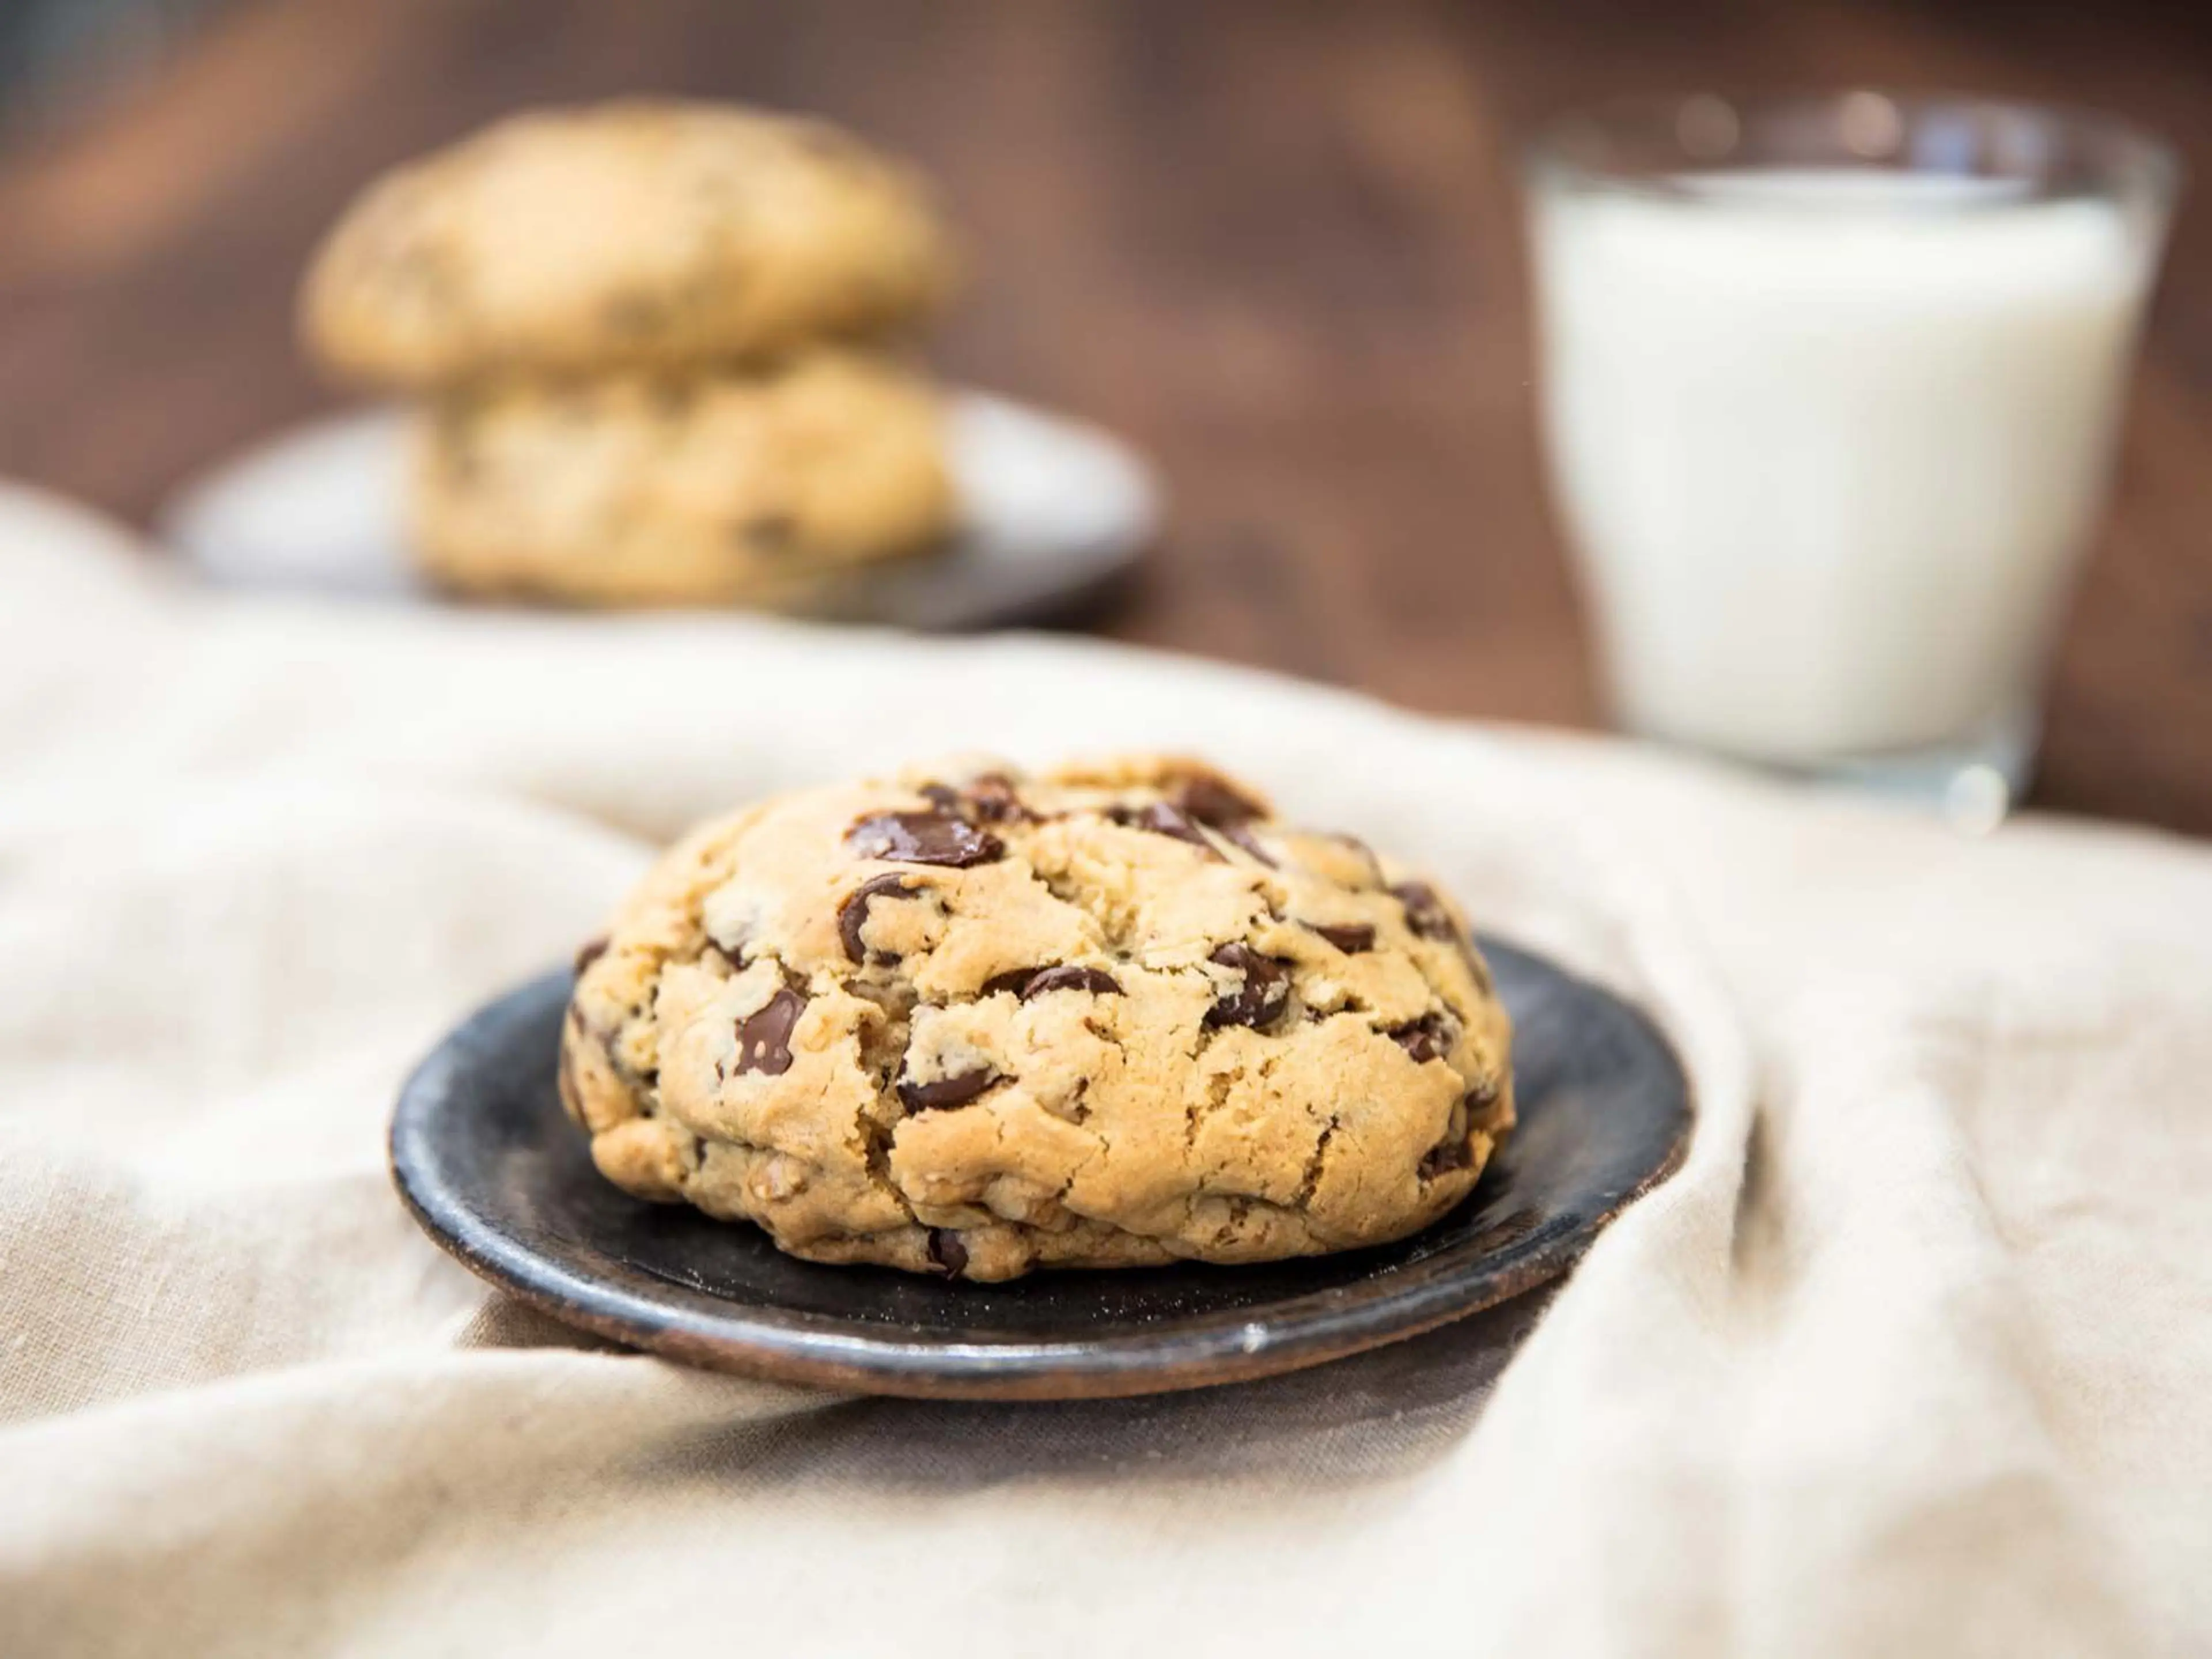 Levain Bakery-Style Super-Thick Chocolate Chip Cookies Recip